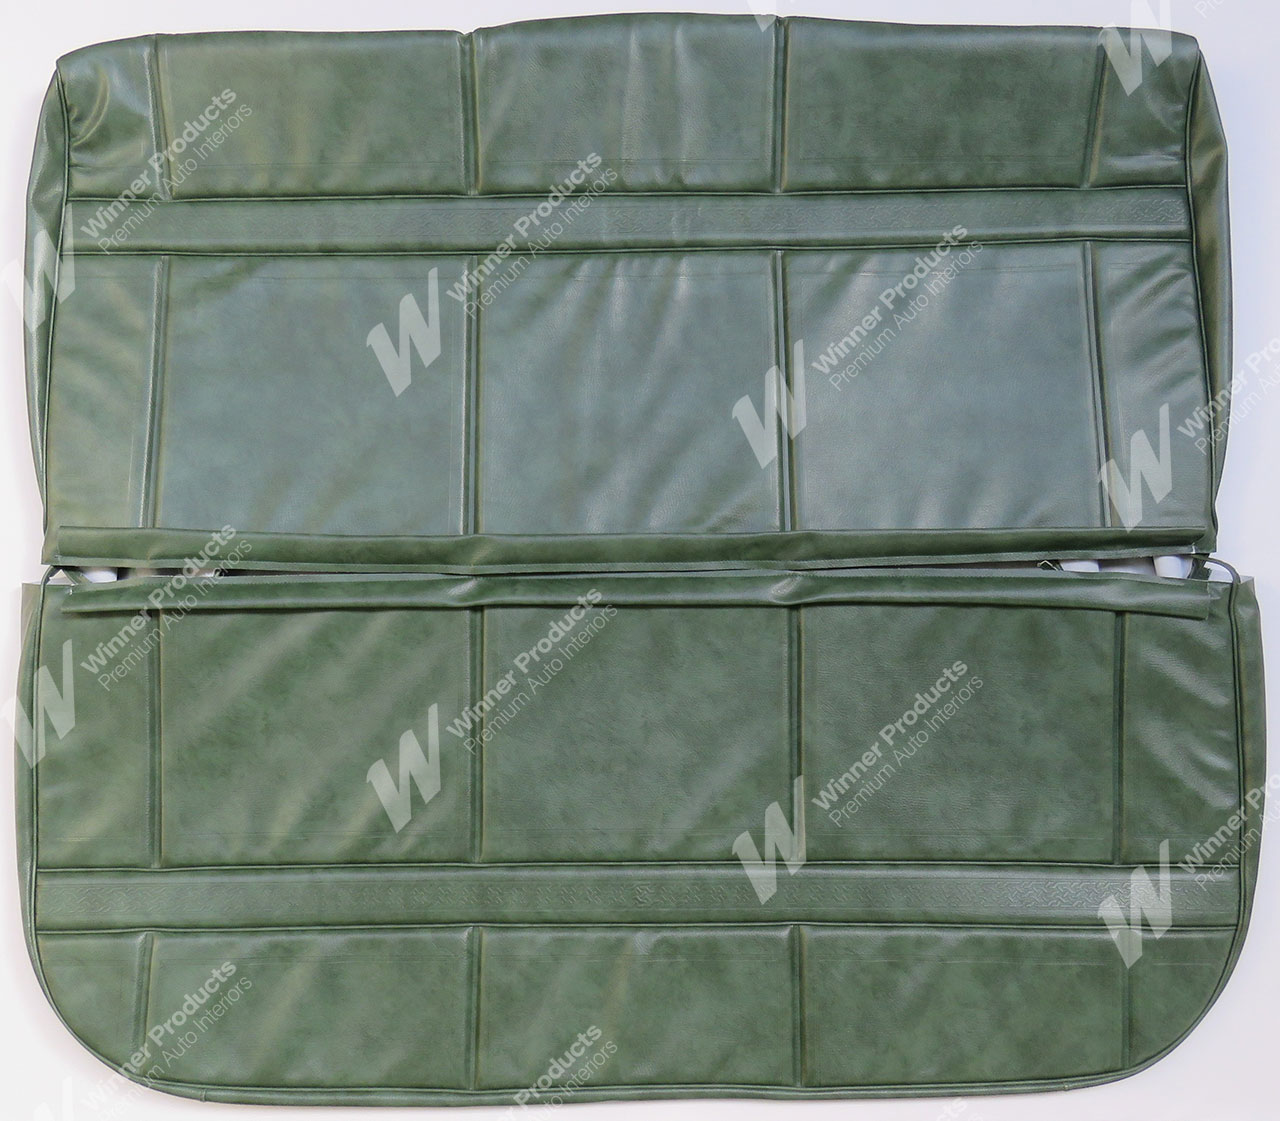 Holden Kingswood HT Kingswood Sedan 16E Isis Green Seat Covers (Image 1 of 4)